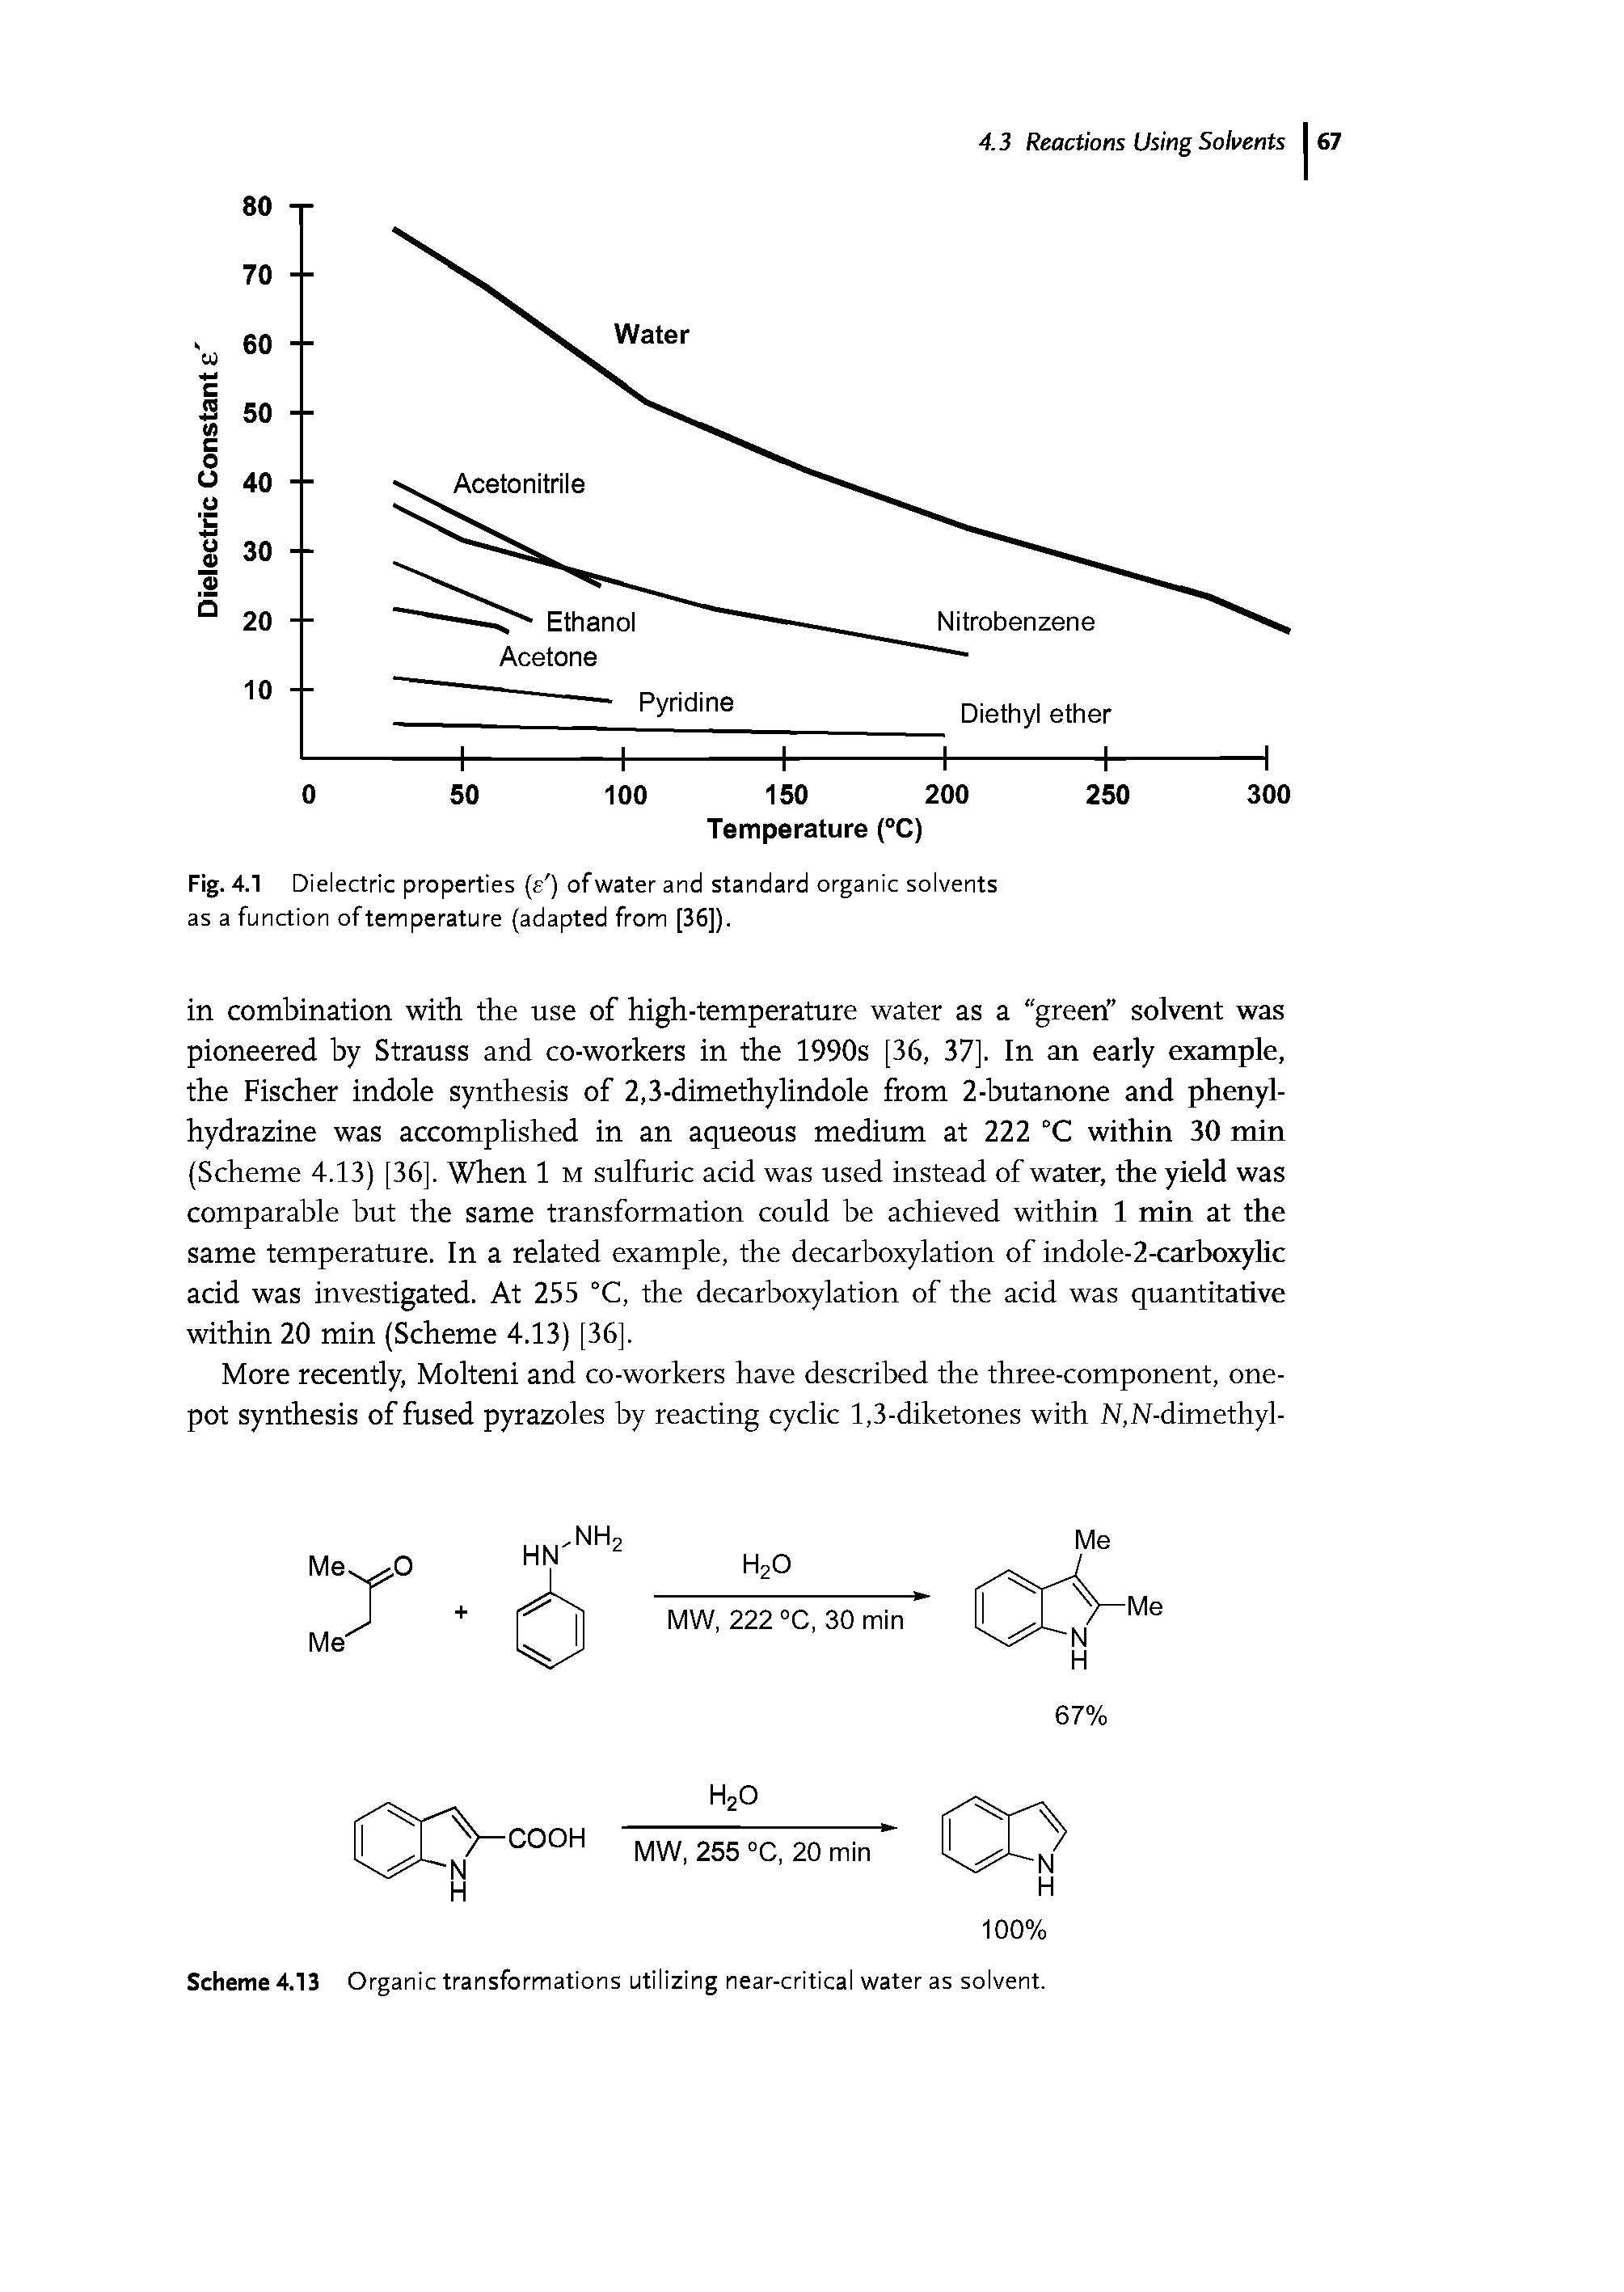 Fig. 4.1 Di electric properties (e ) of water and standard organic solvents as a function oftemperature (adapted from [36]).